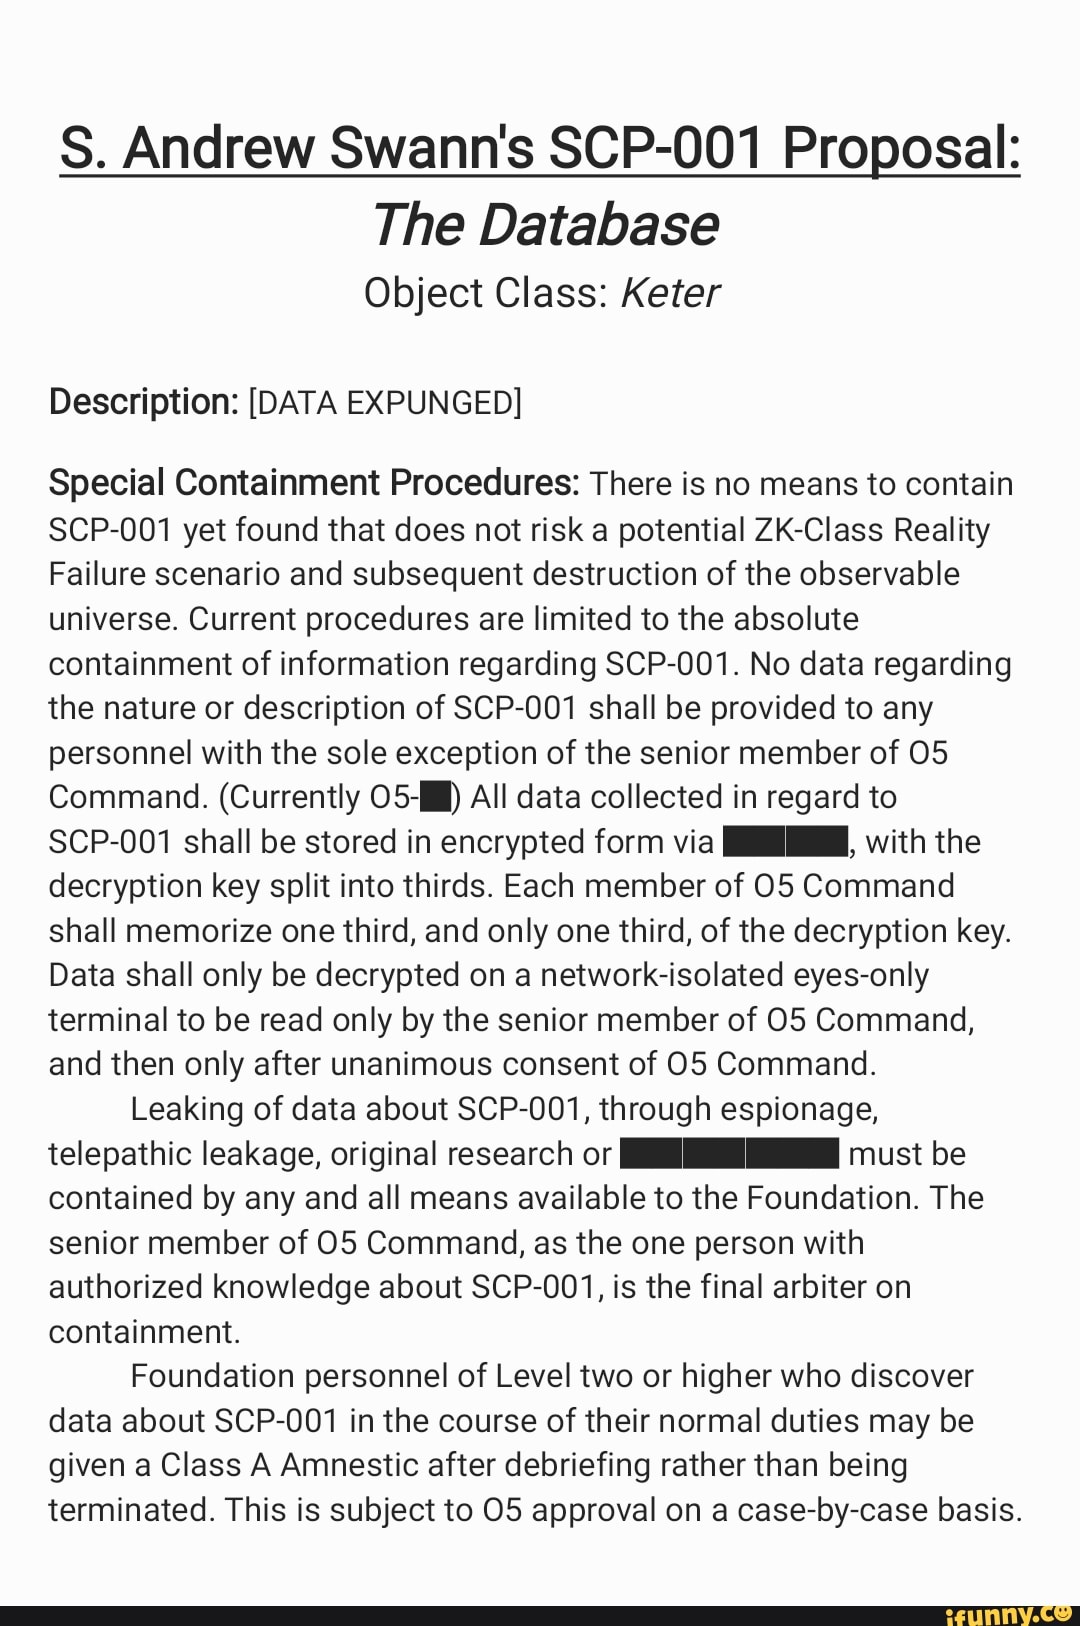 SCP-001 - The Database  SCP 001 is a Keter Class anomaly also known as The  Database. There is no means to contain SCP-001 yet found that does not risk  a potential